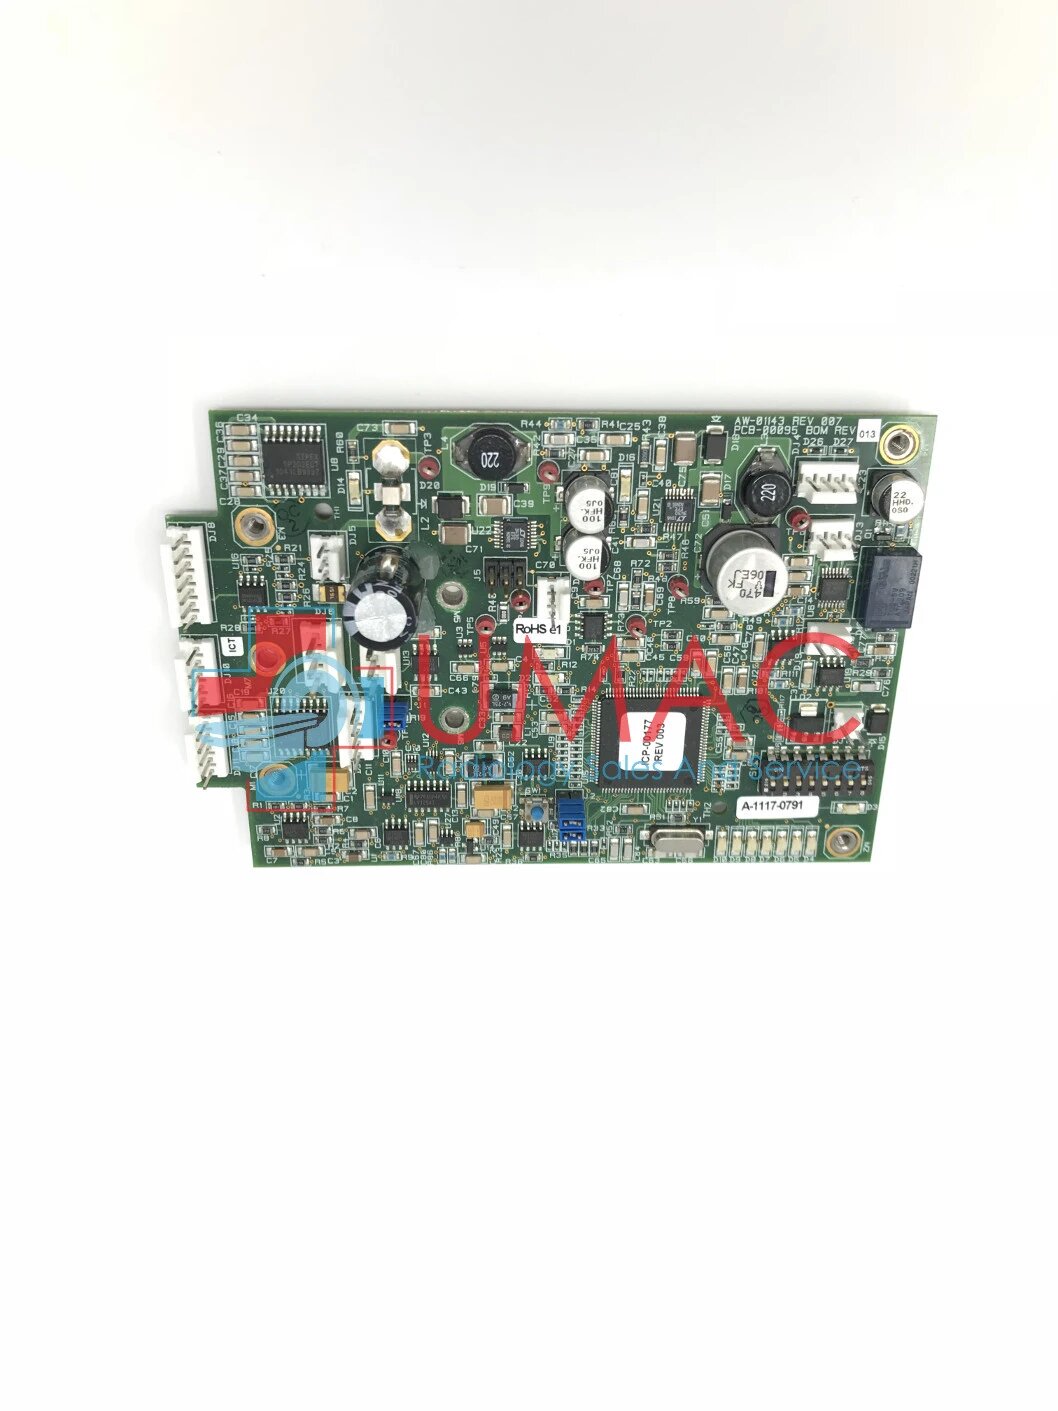 Hologic Dimensions Mammography PCB-00095 Compression Device Interface Board